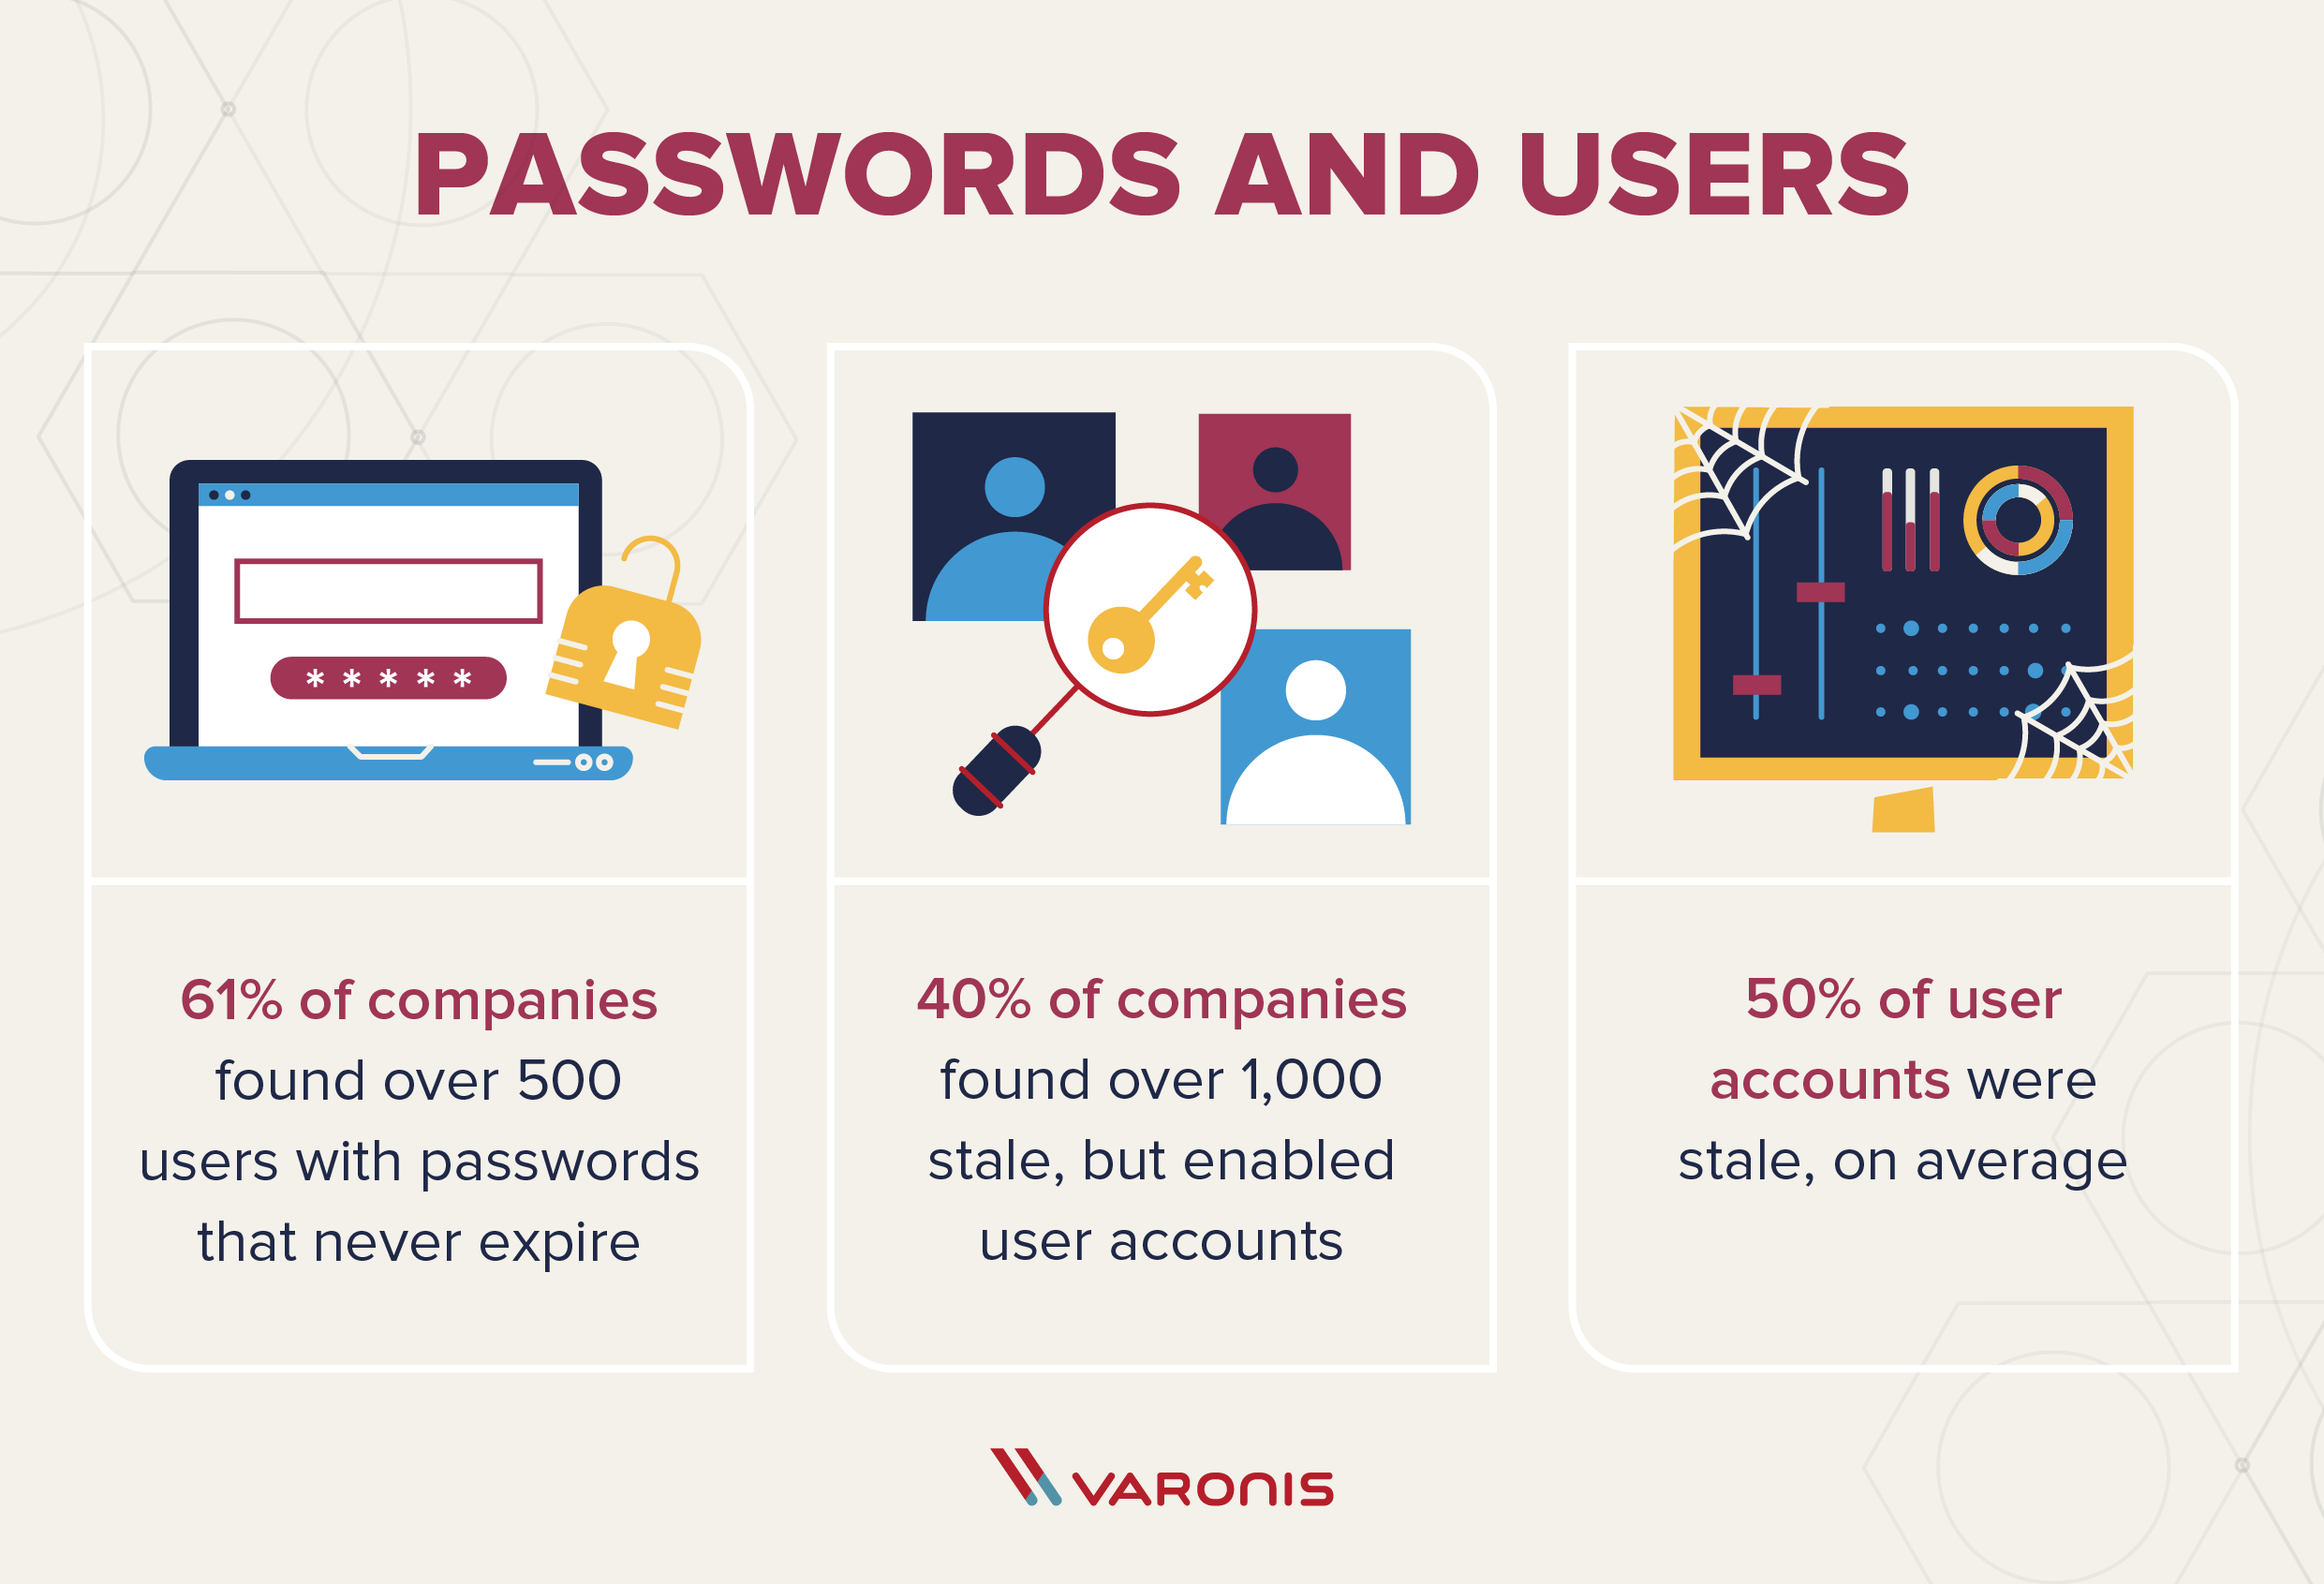 an illustration of a couple of different data security symbols with text that says: 61% of companies found over 500 users with passwords that never expire, 40% of companies found over 1,000 stale, but enabled user accounts, 50% of user accounts were stale, on average.